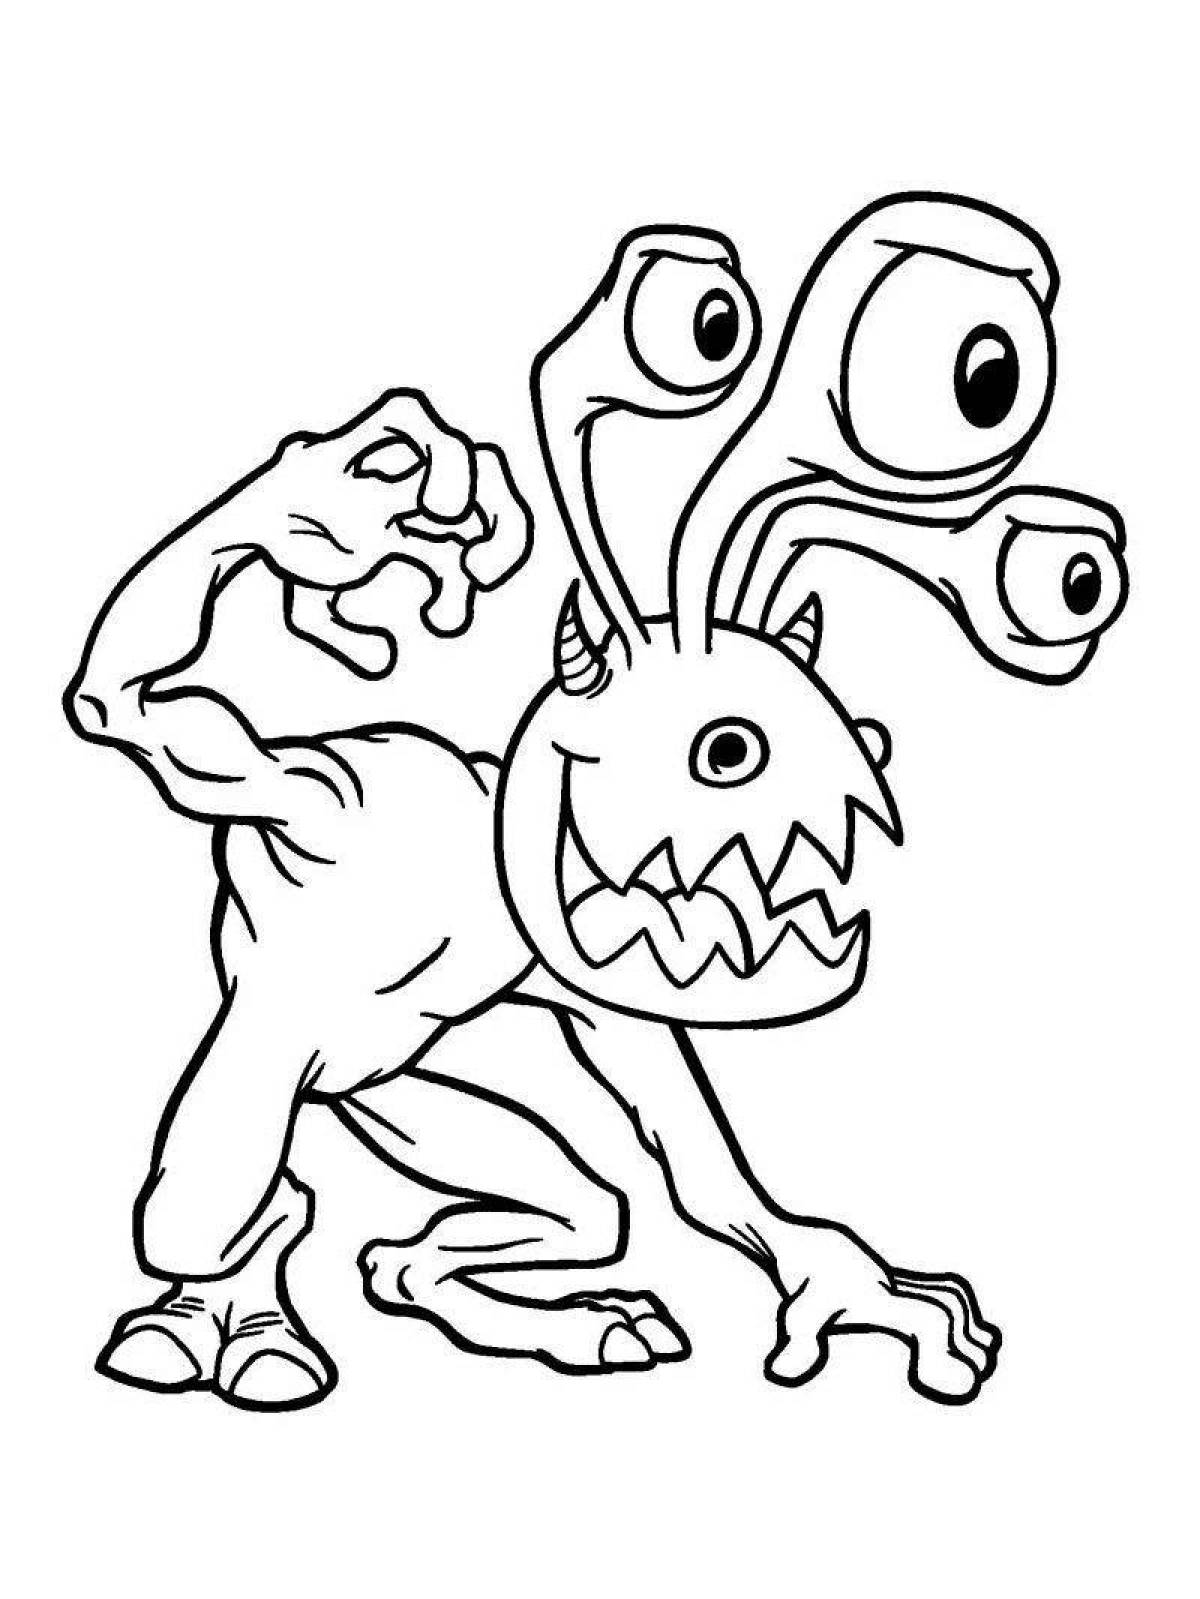 Happy hagivagi monsters coloring page